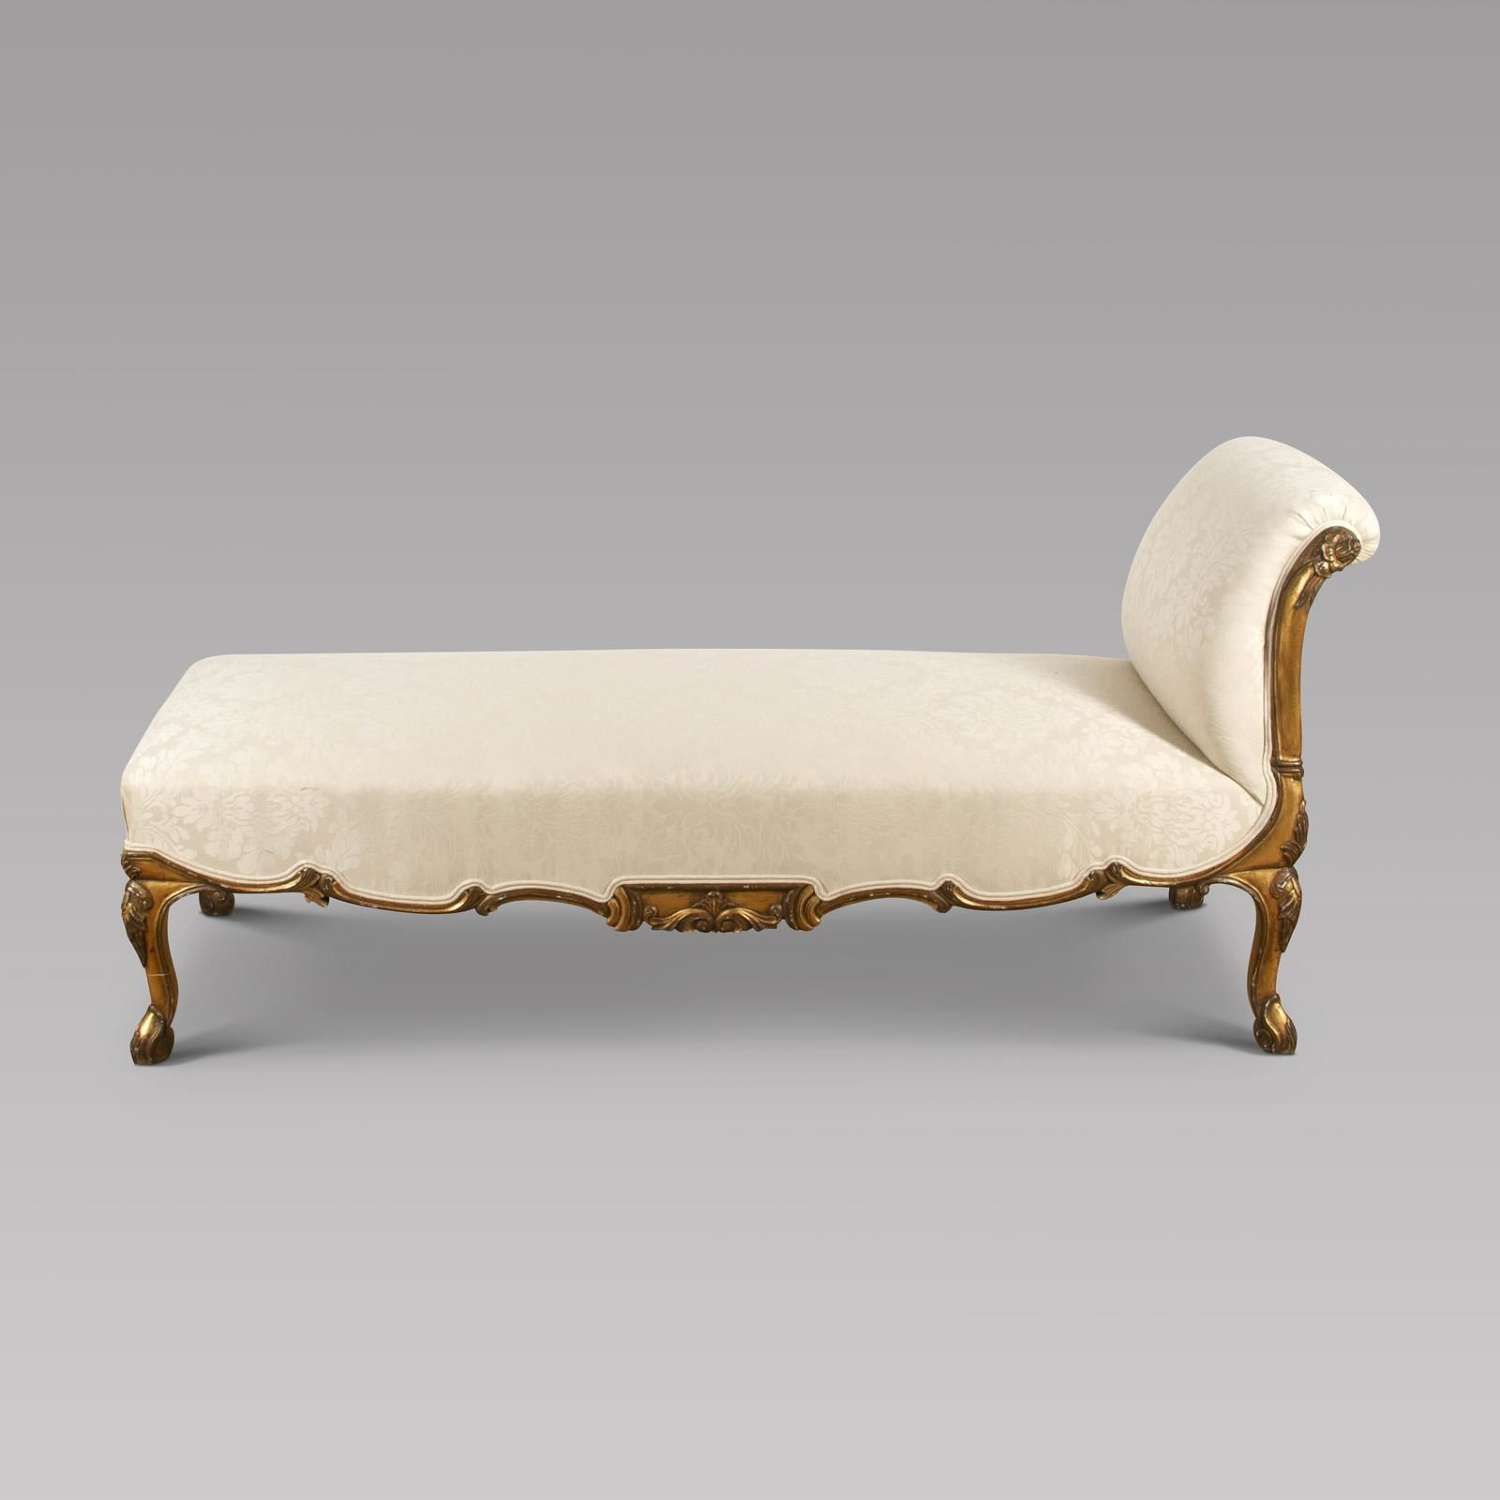 19th Century Giltwood Chaise Longue